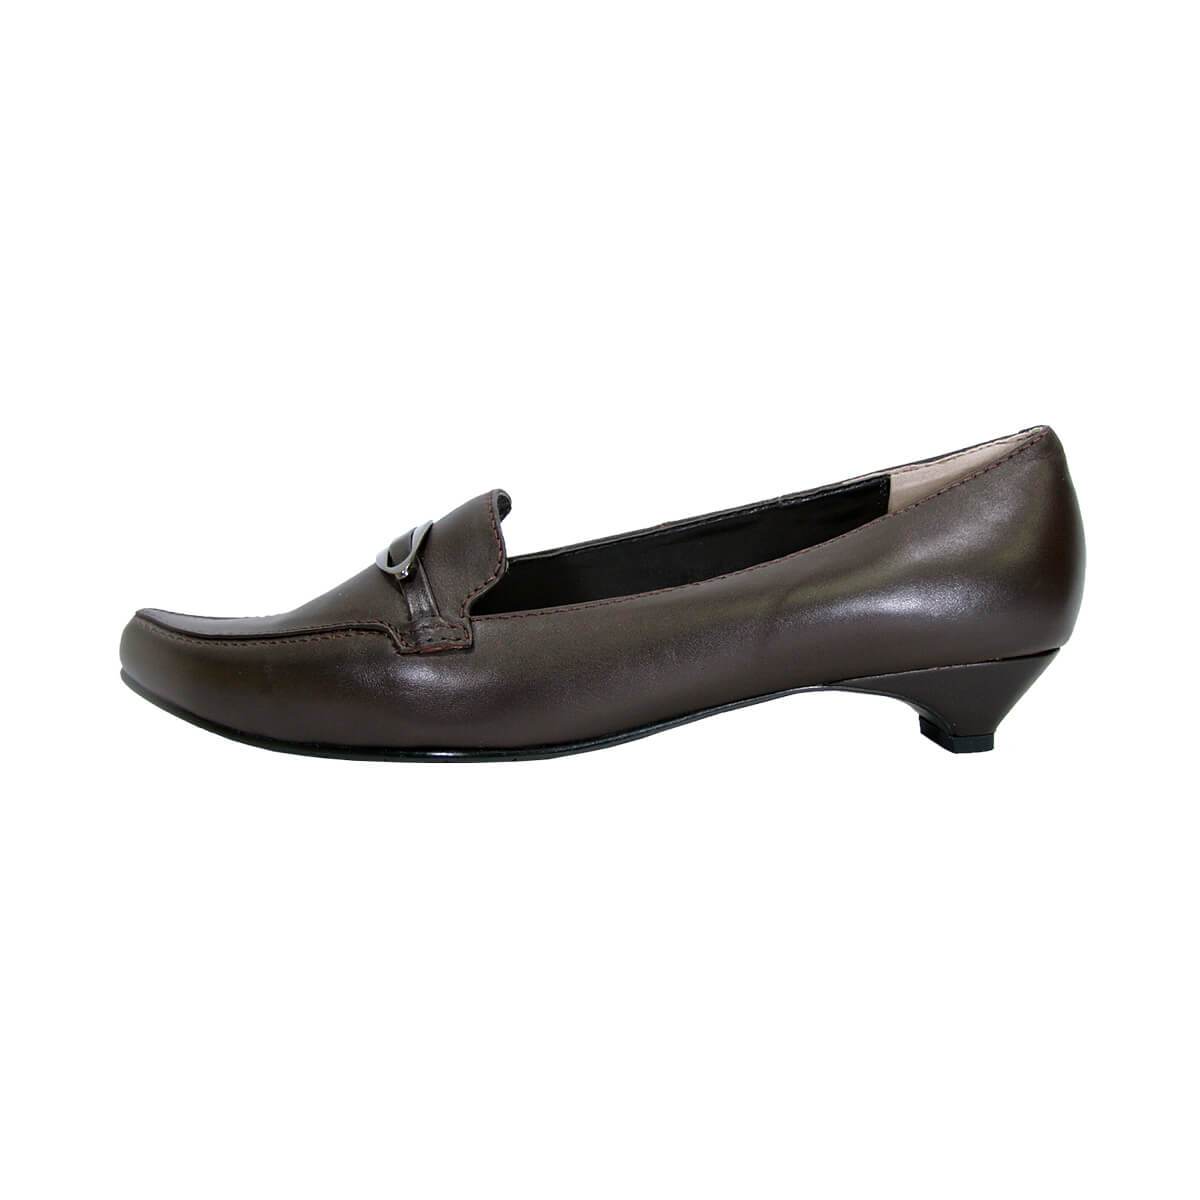 PEERAGE Louise Women's Wide Width Casual Leather Shoes